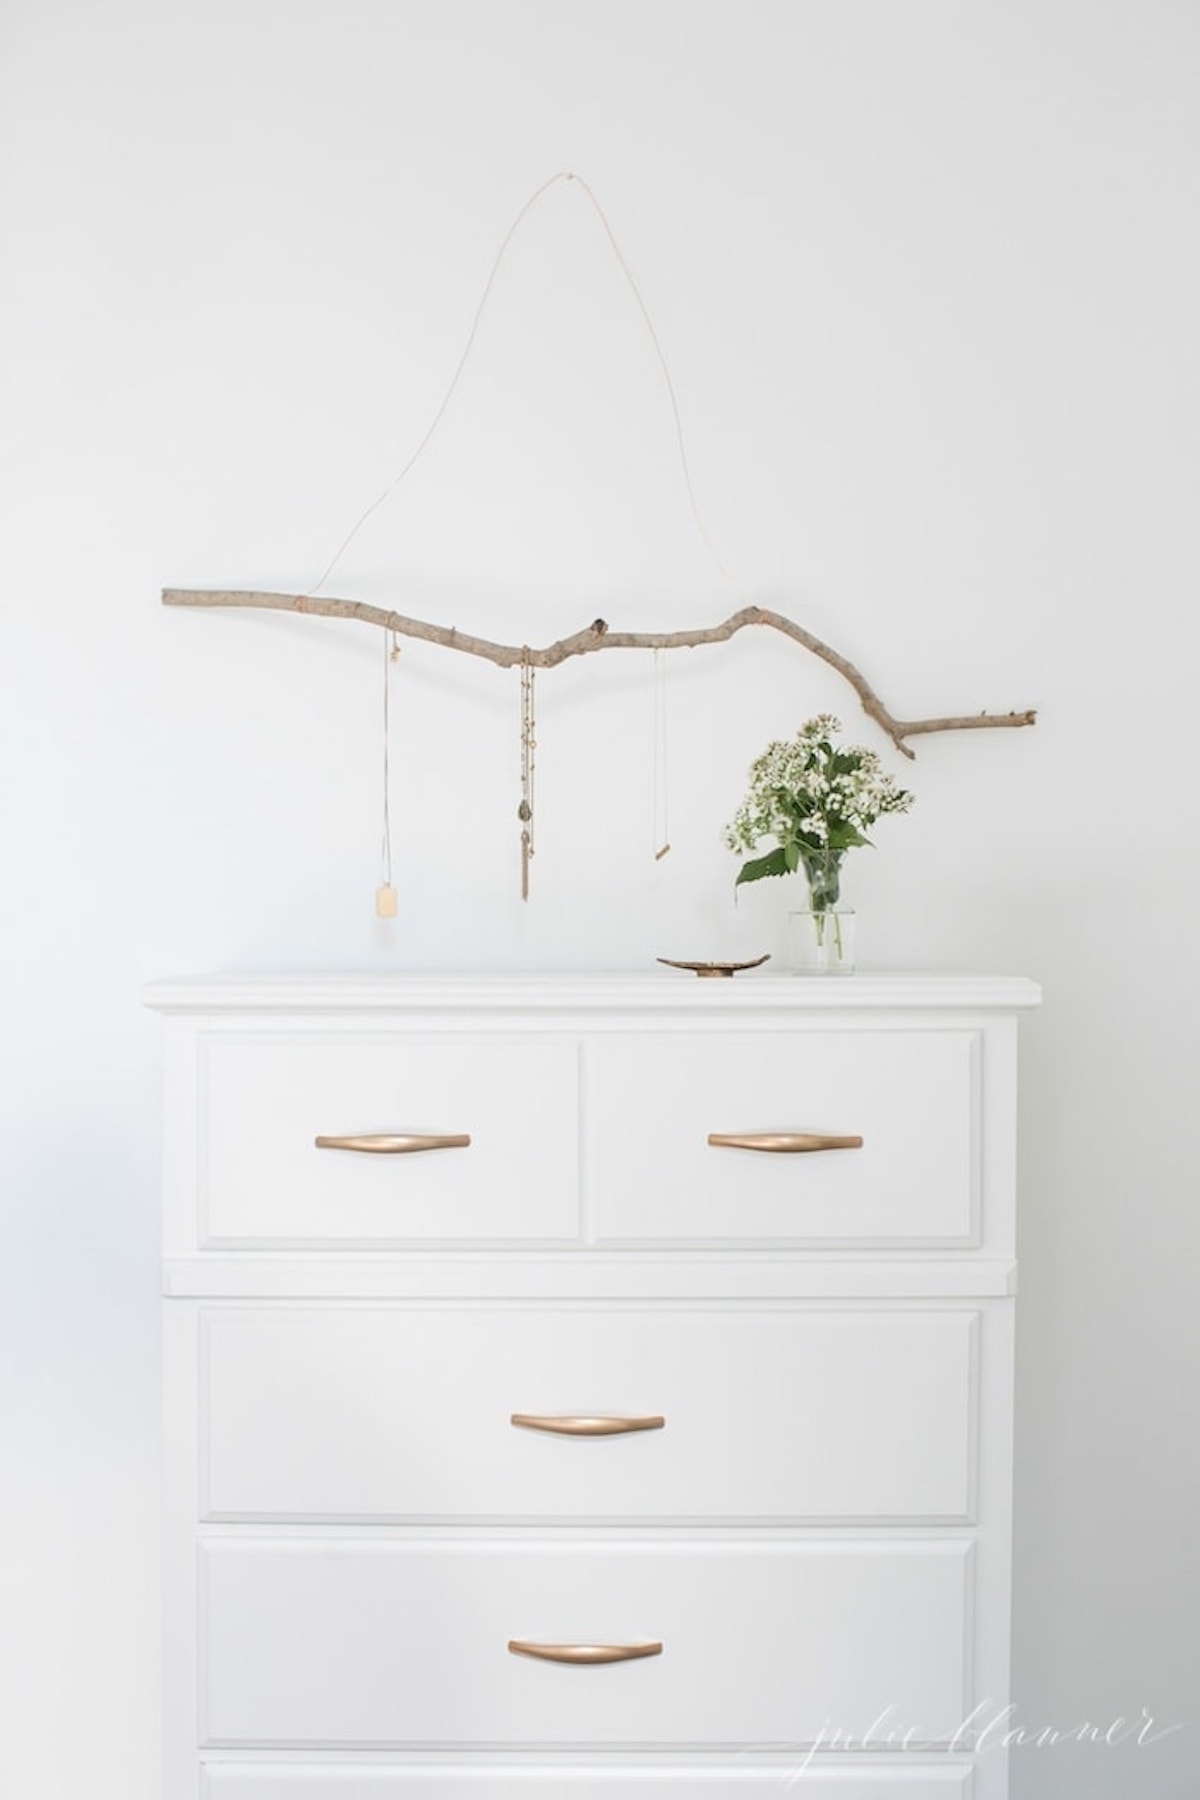 Add a unique touch to your DIY wall decor with this elegant white dresser adorned with a tastefully placed twig.